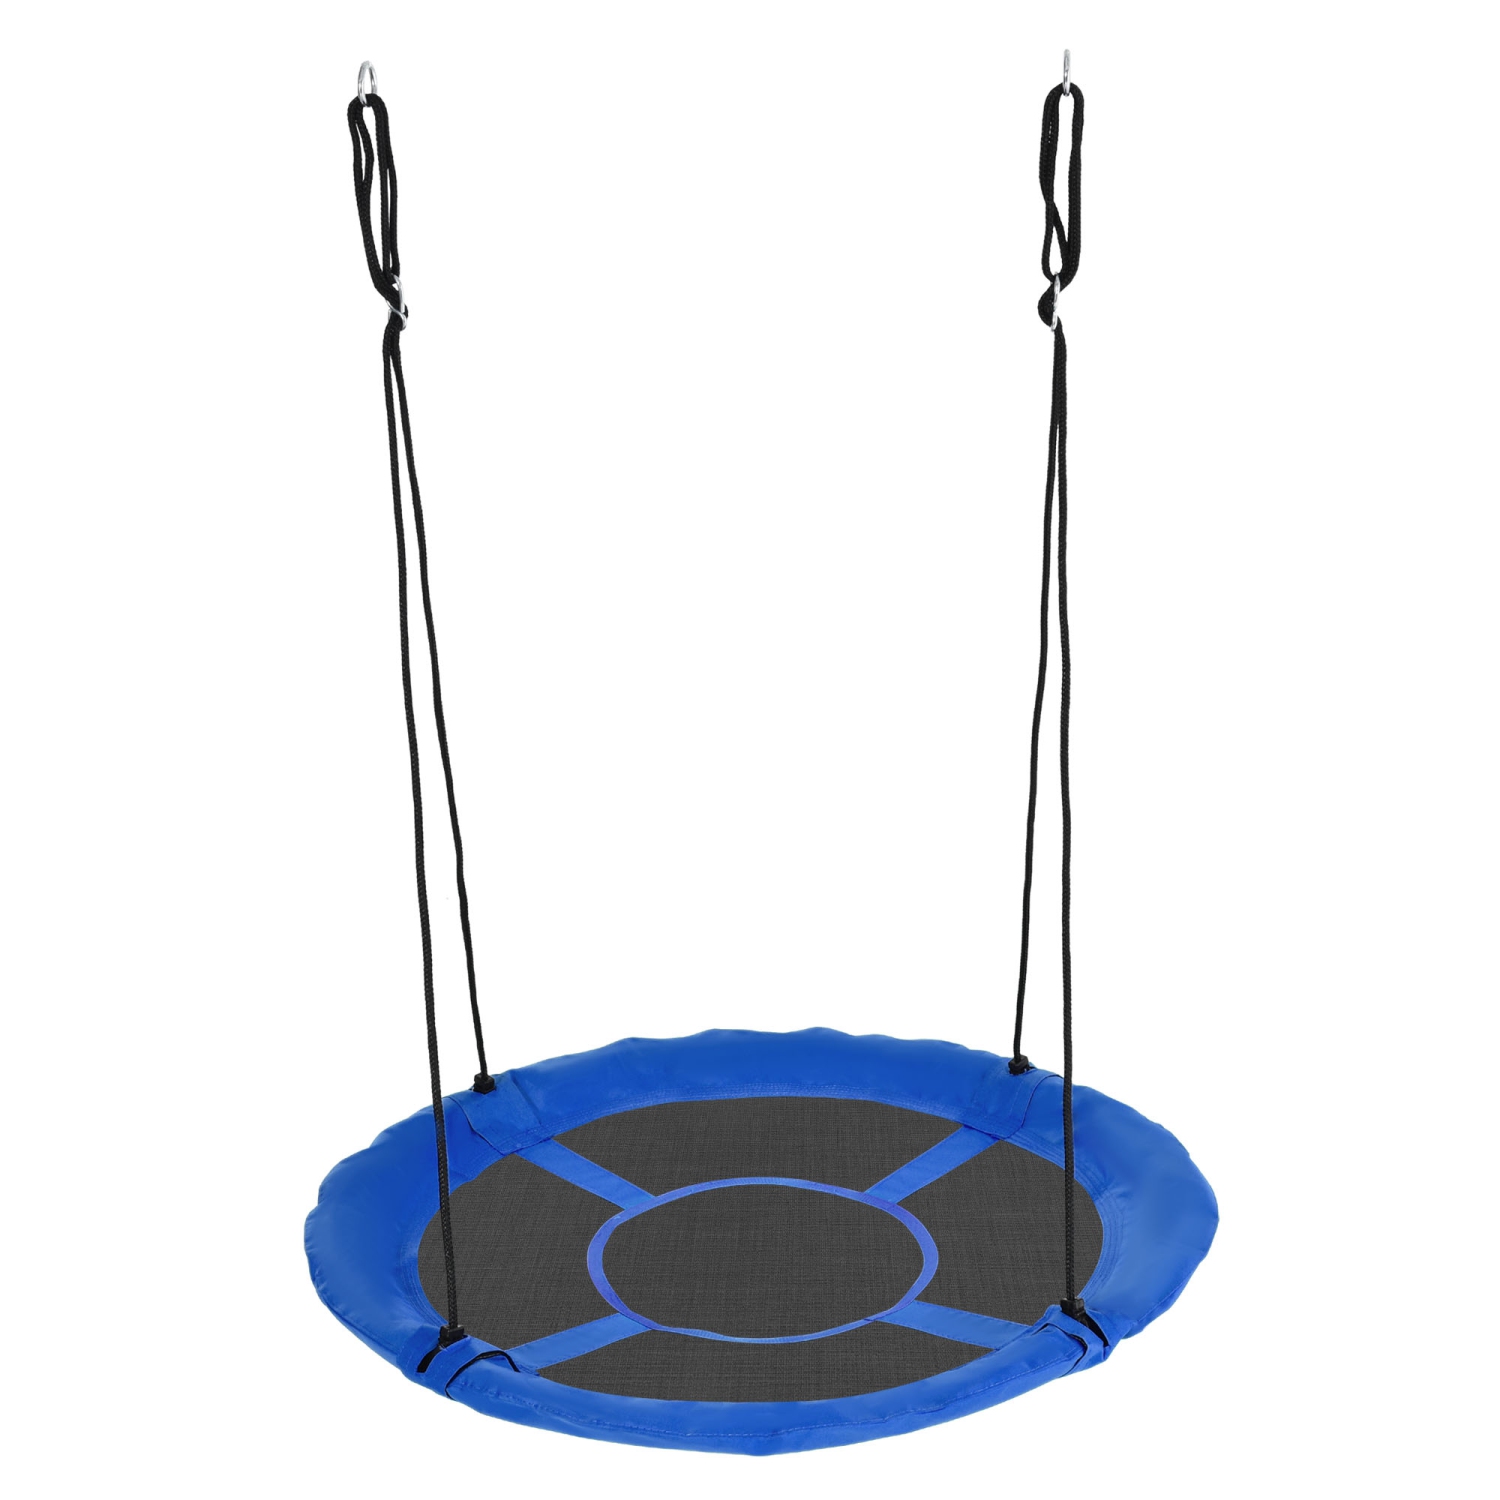 Outsunny 43.25" Saucer Swing Giant Hanging Tree Swing, Nest Web Rope Seat, Adjustable Hanging Ropes for Indoor Outdoor Children 3-12 Years Old, Blue